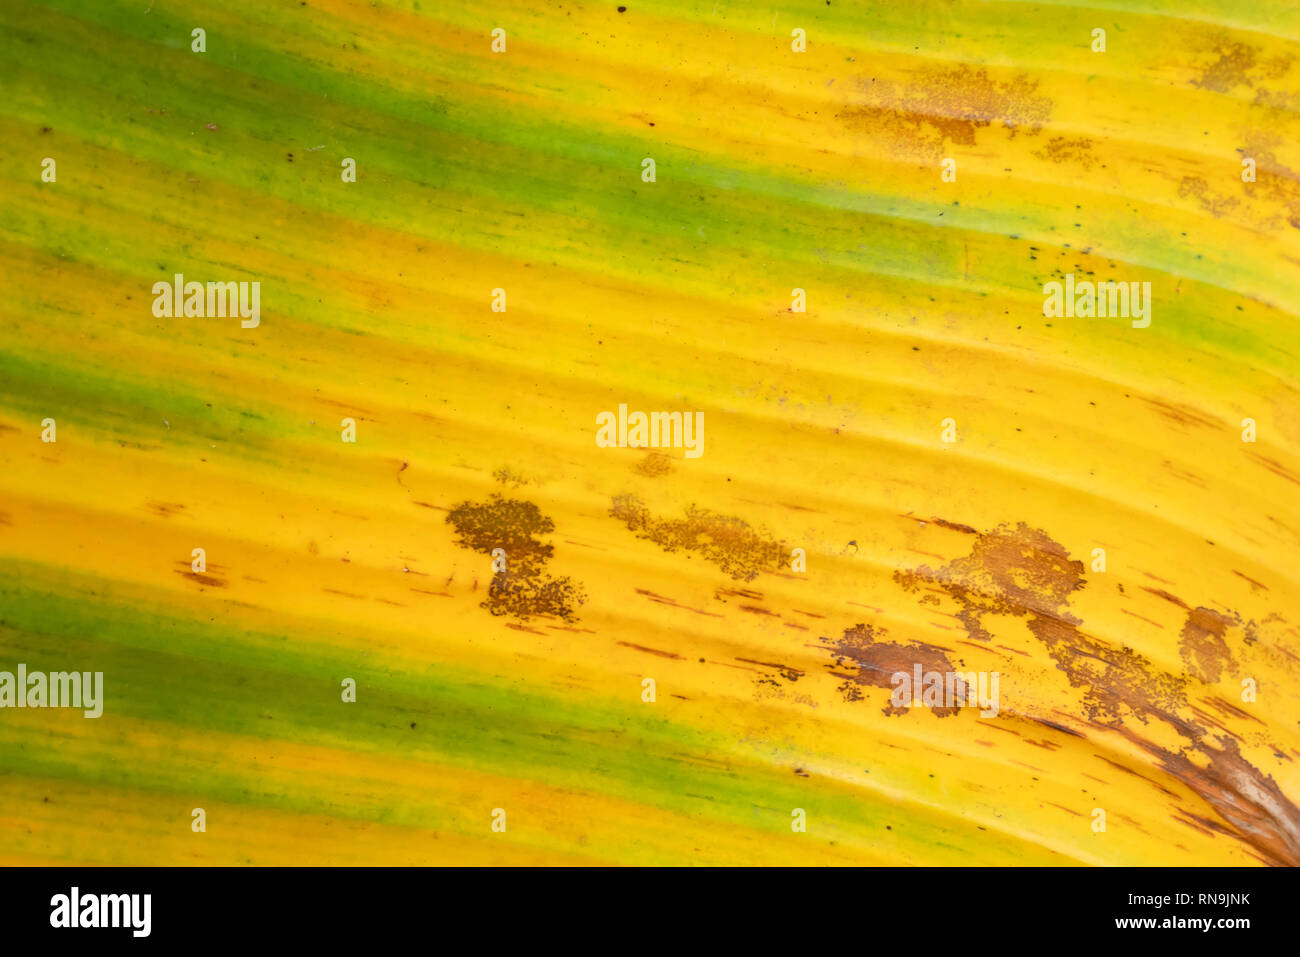 Abstract background and texture of old banana leaf with yellow and green color. Dirty on dry leaves. Stock Photo